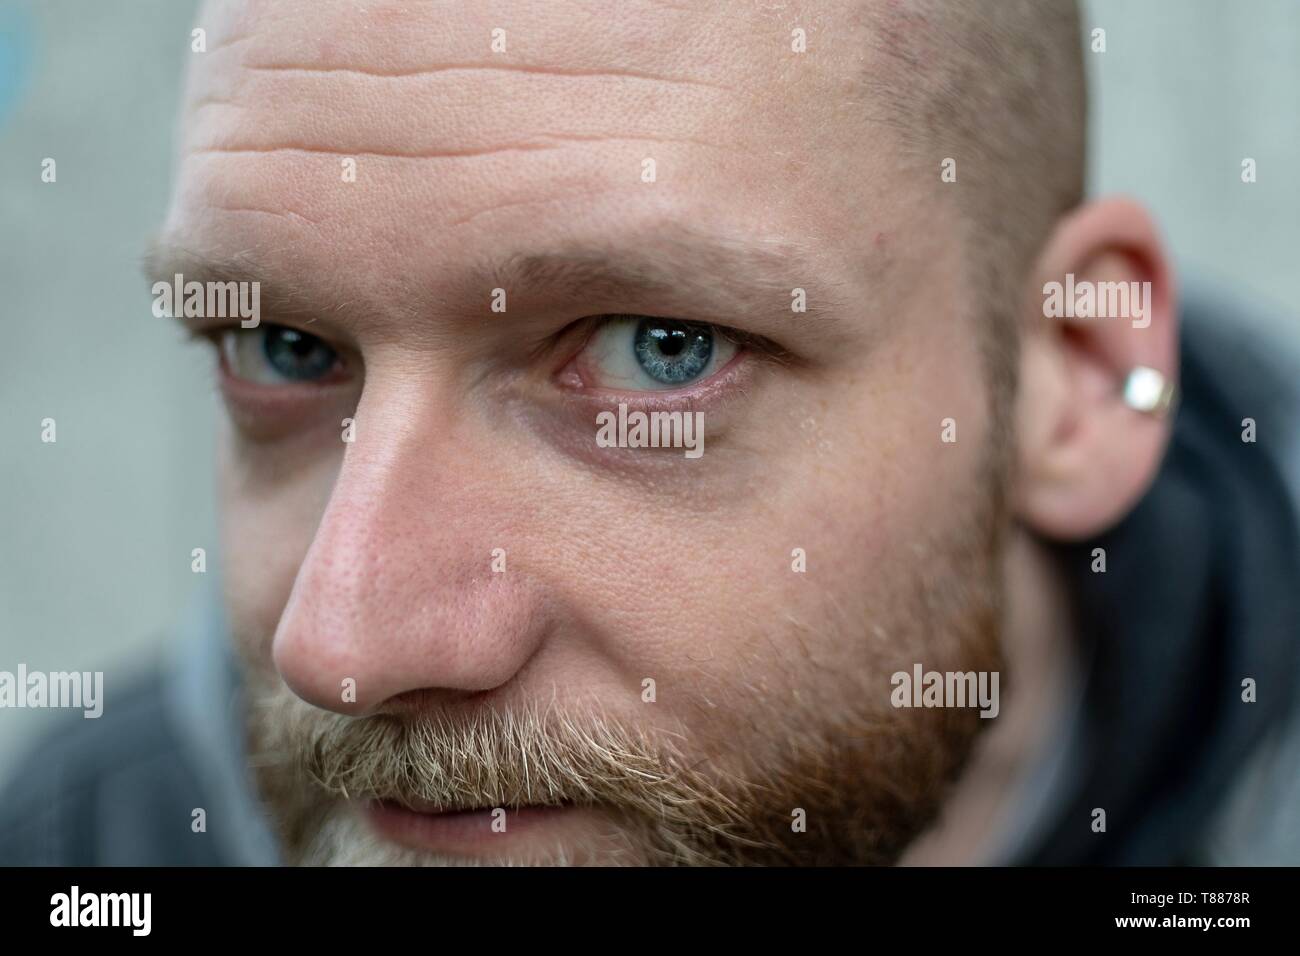 serious looking bearded man looks into the camera Stock Photo